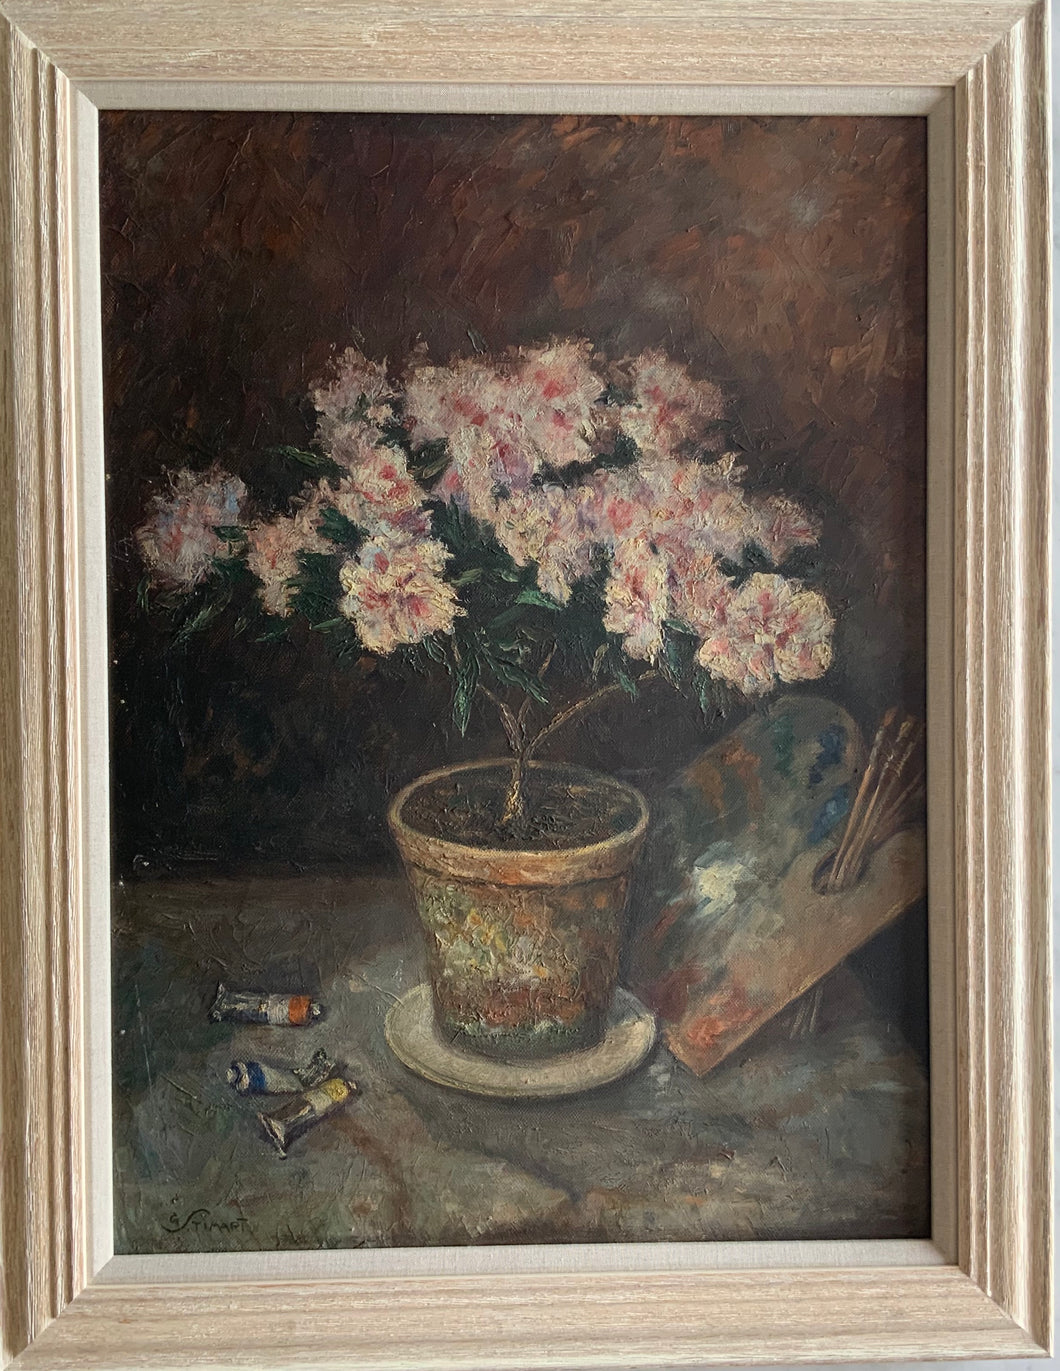 Oil painting on canvas: Pink flowers and palette (artist Georges Stimart, 1886-1952)